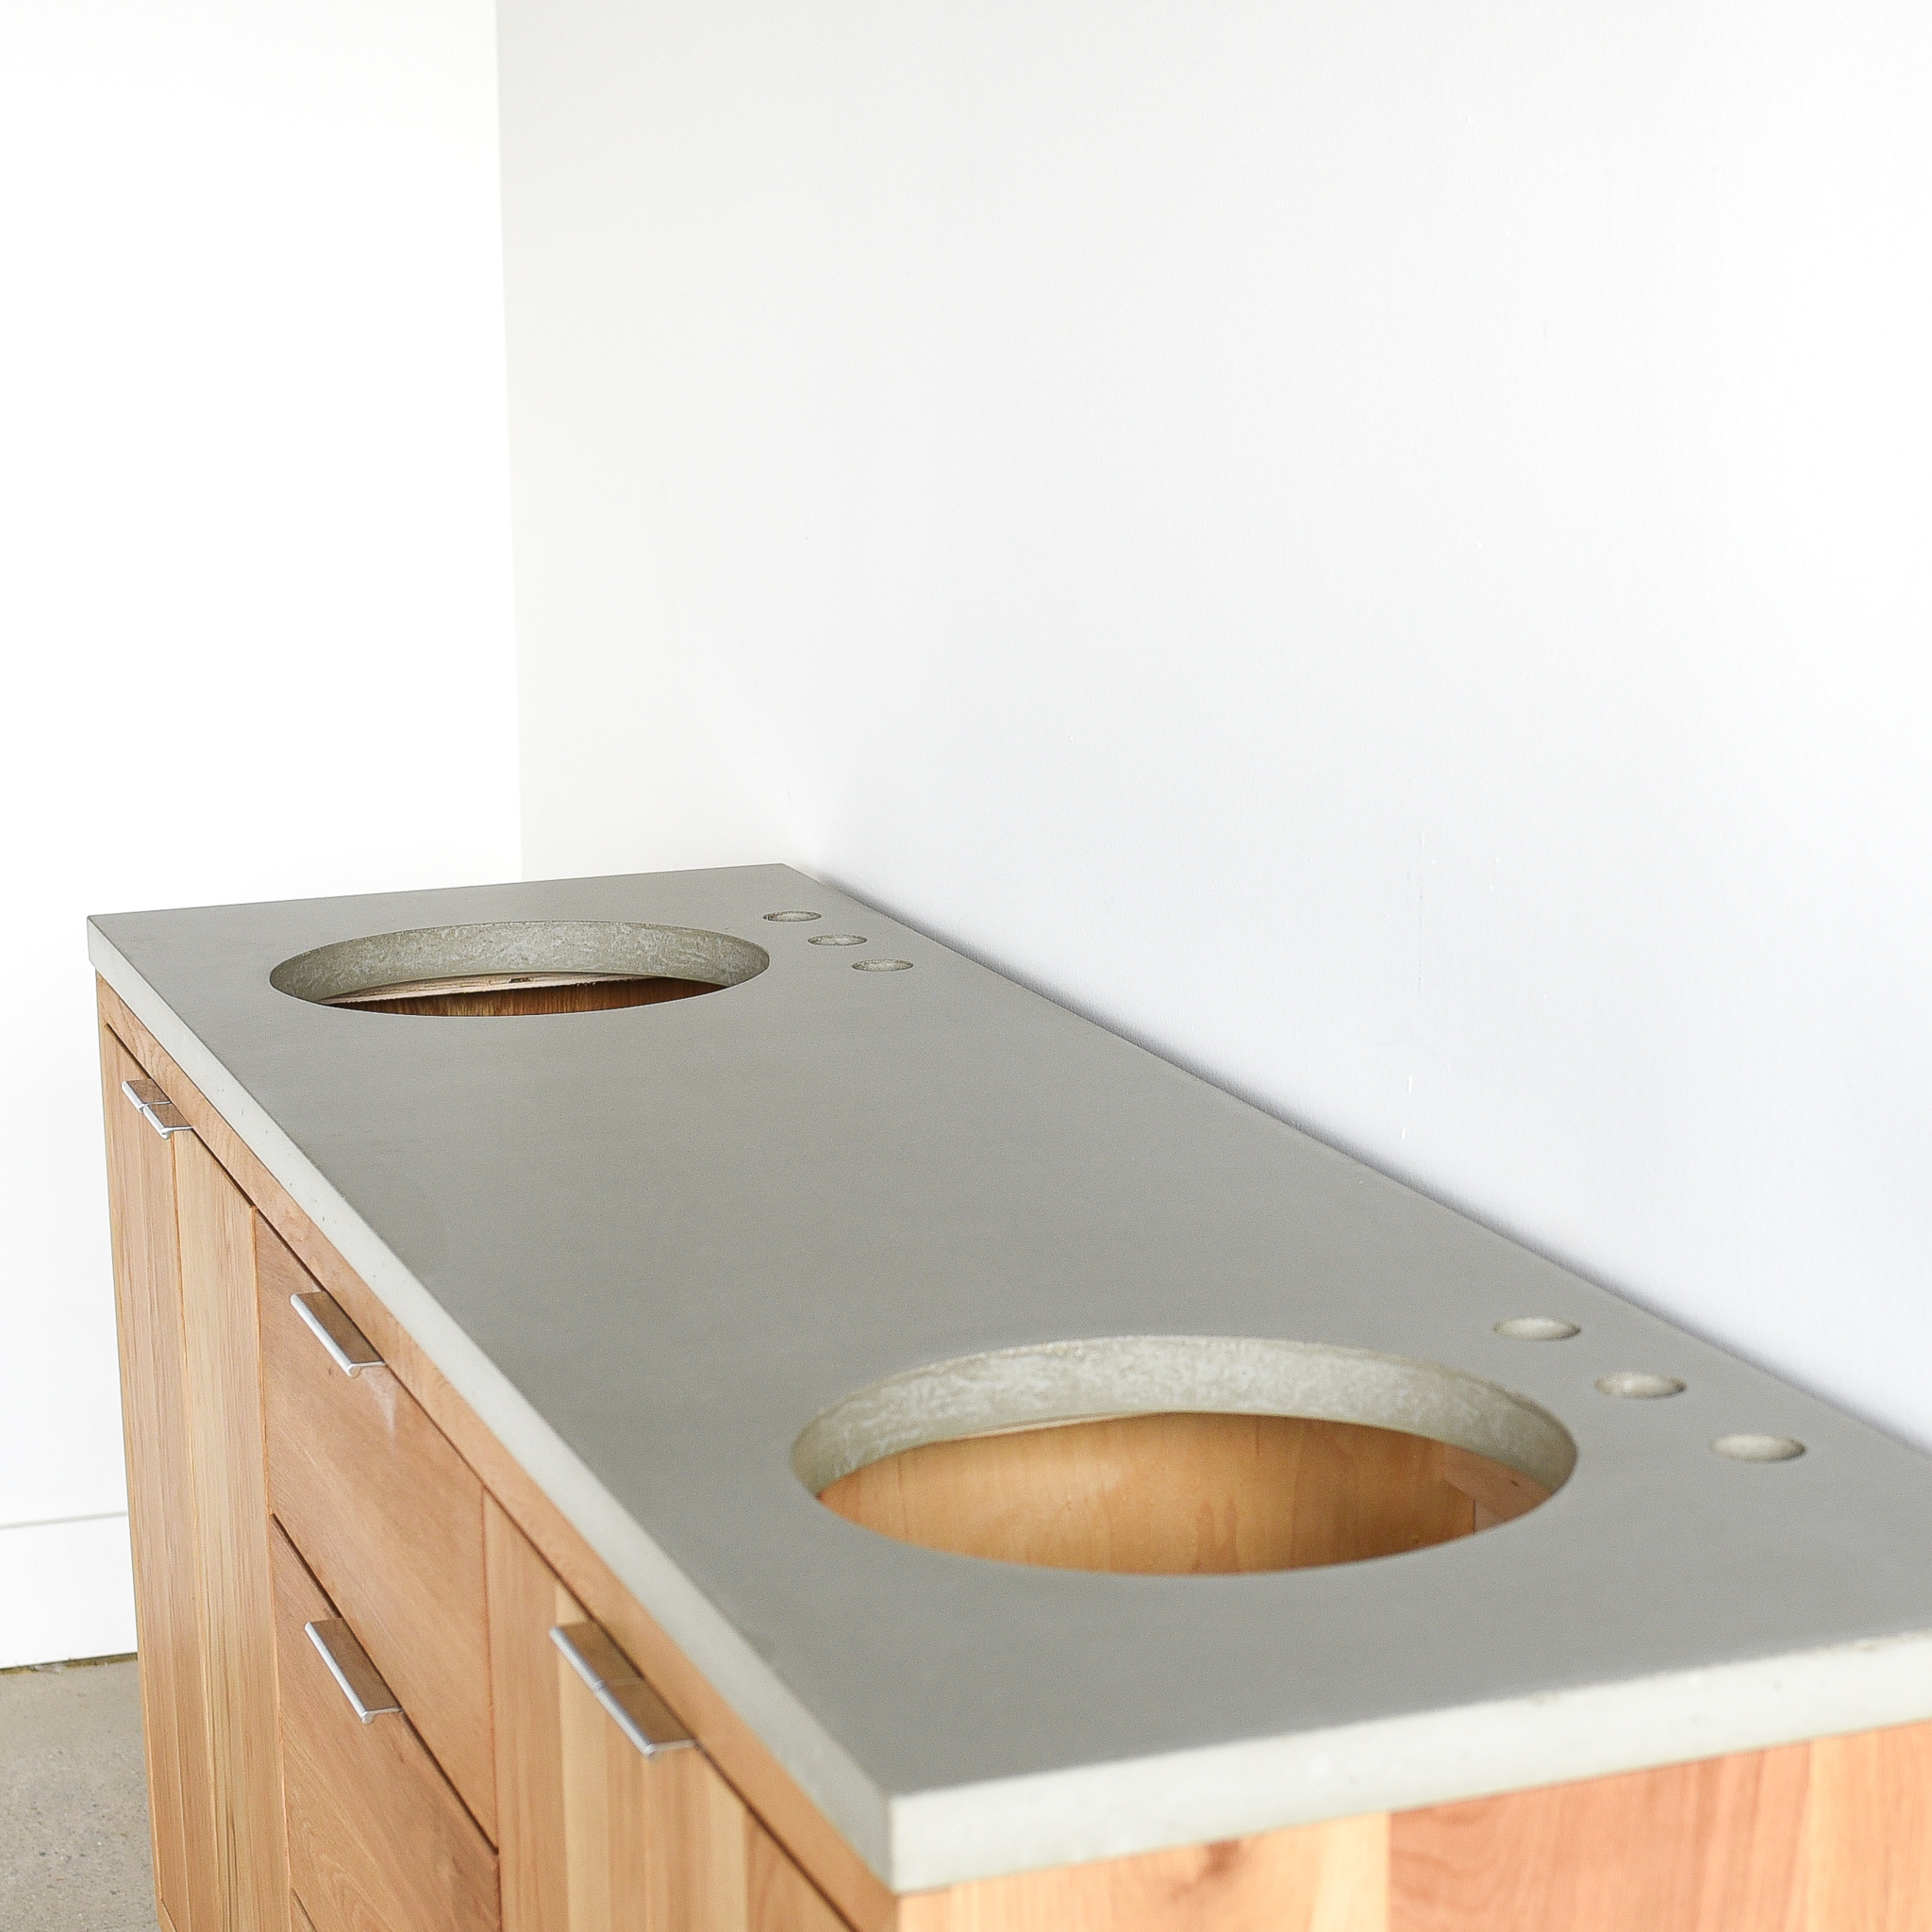 Concrete Vanity Top Double Oval Undermount Sinks What We Make